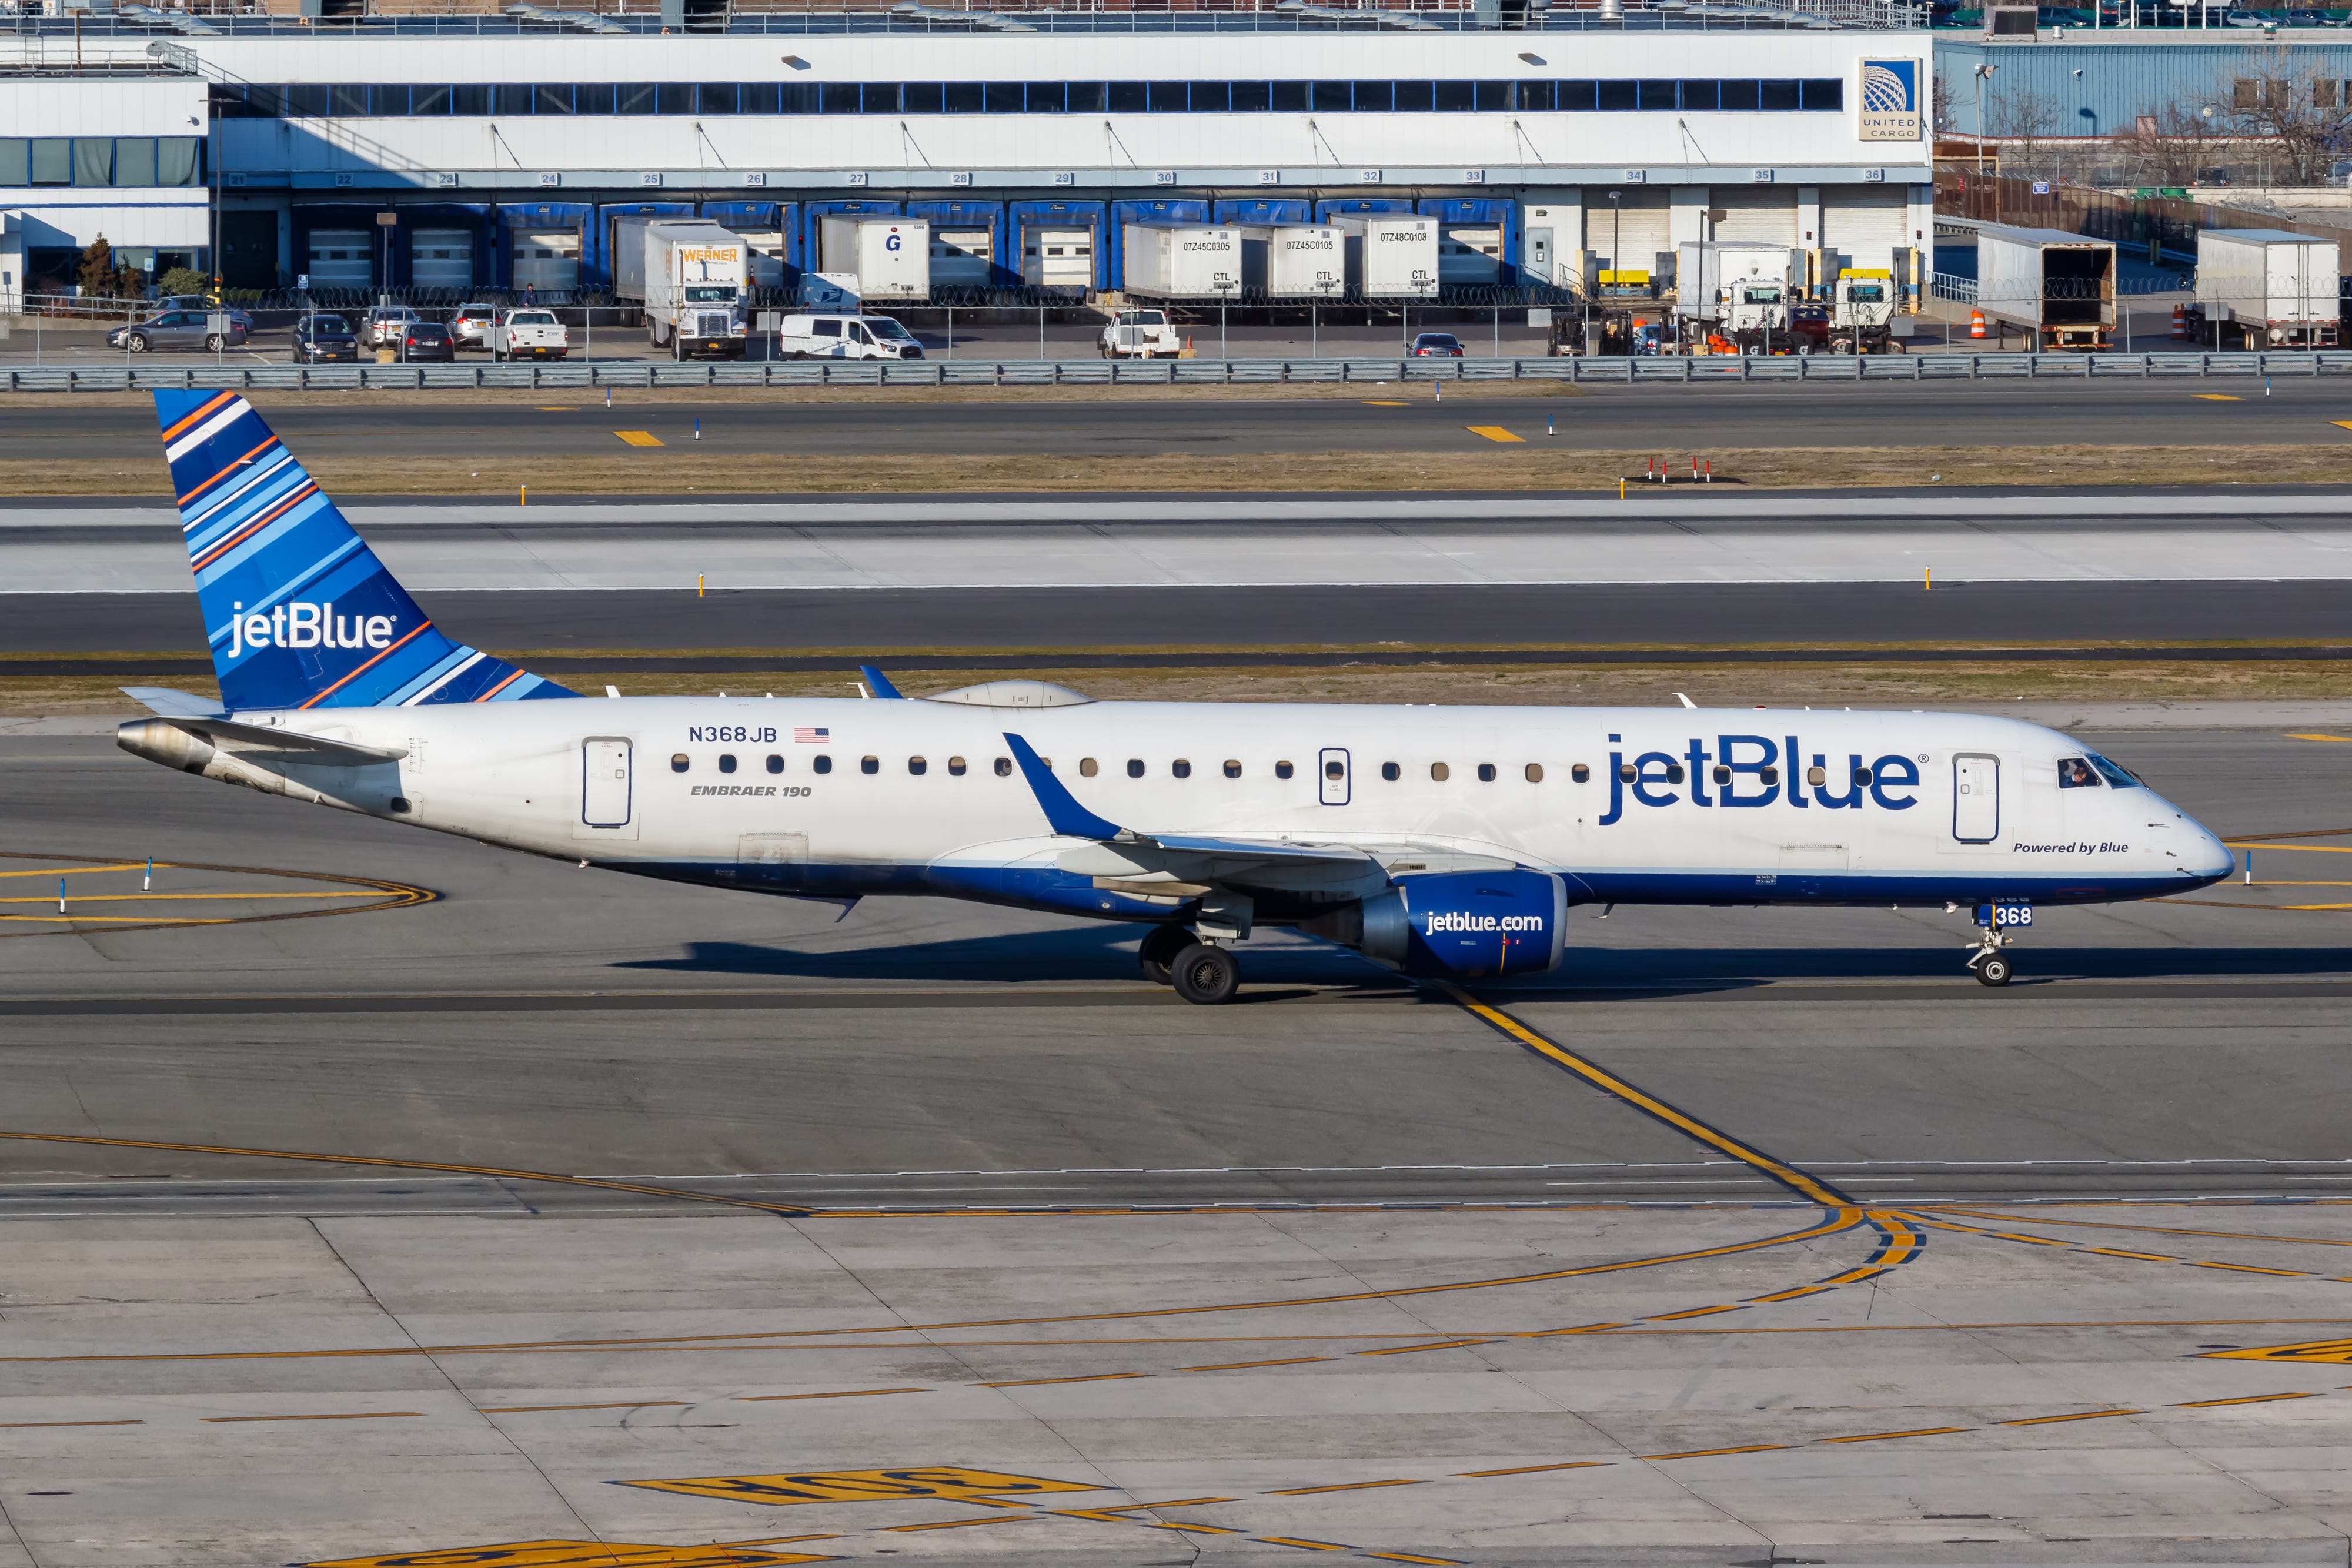 passengers deplaned, firefighters respond to jfk jetblue flight that experienced apparent flameout: sources